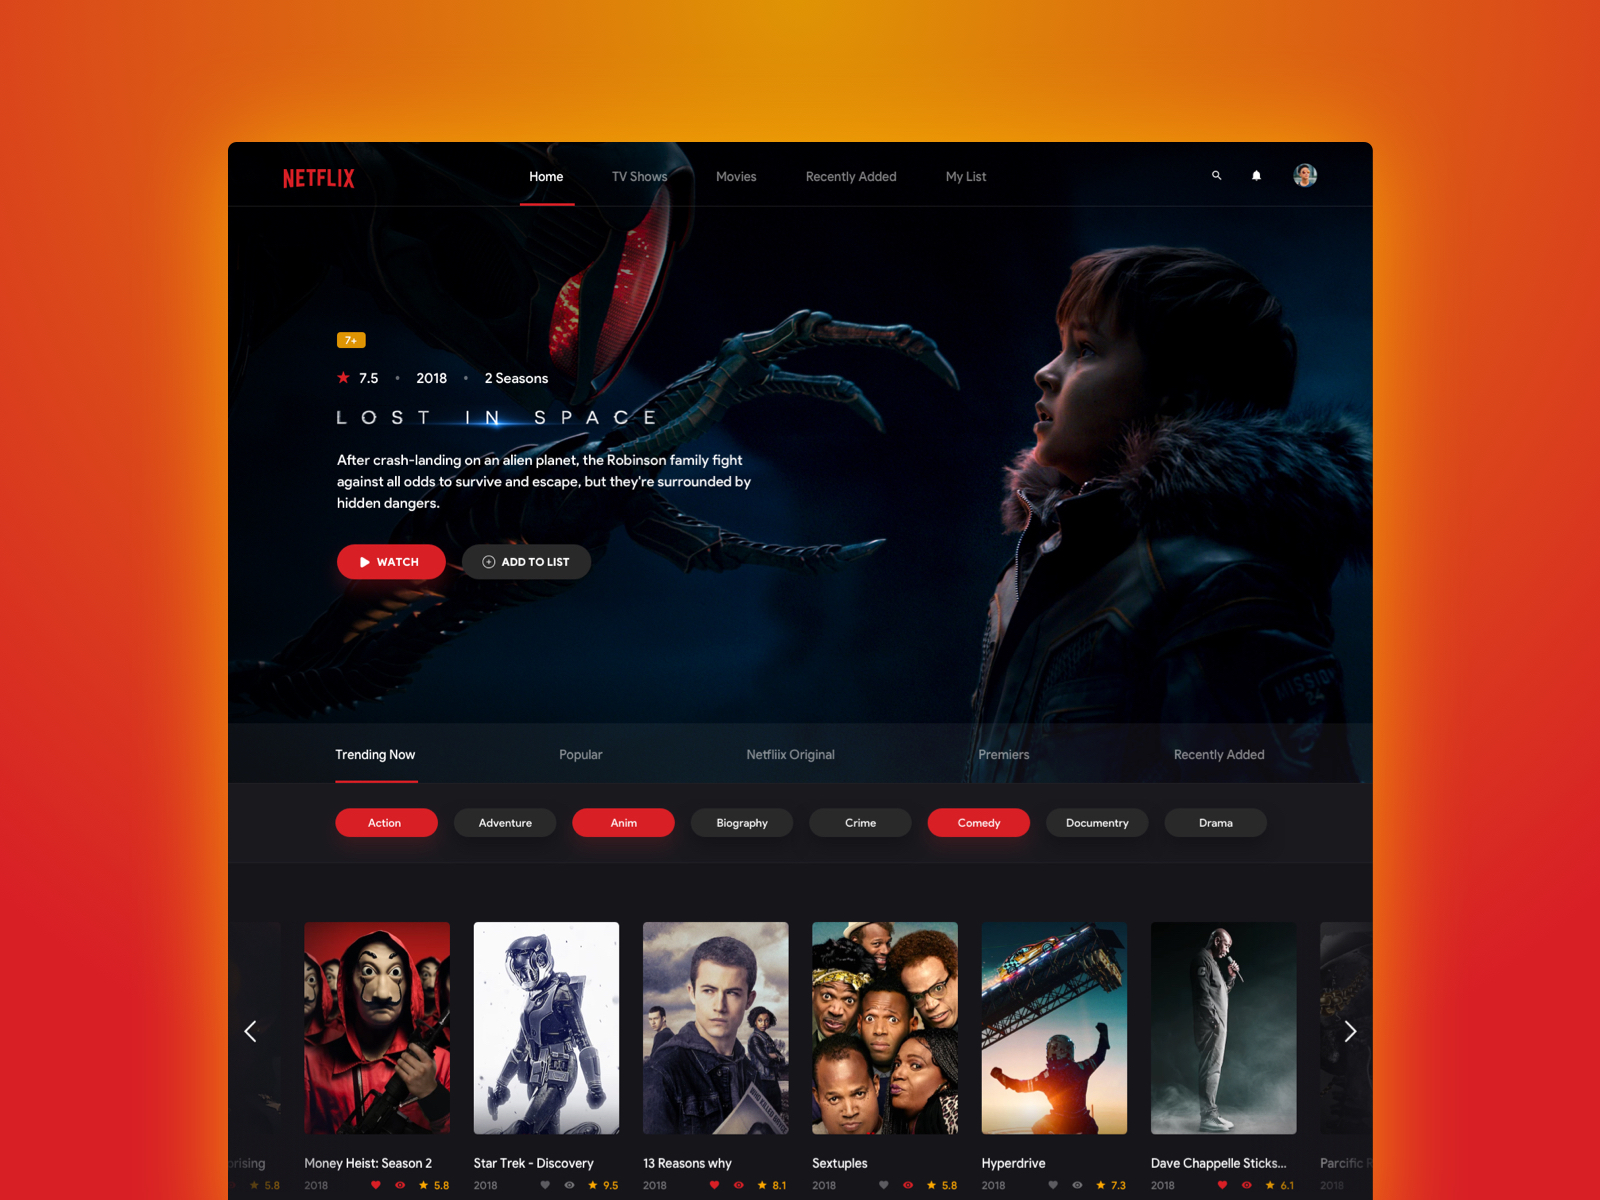 netflix-homepage-redesign-concept-by-mike-taylor-on-dribbble